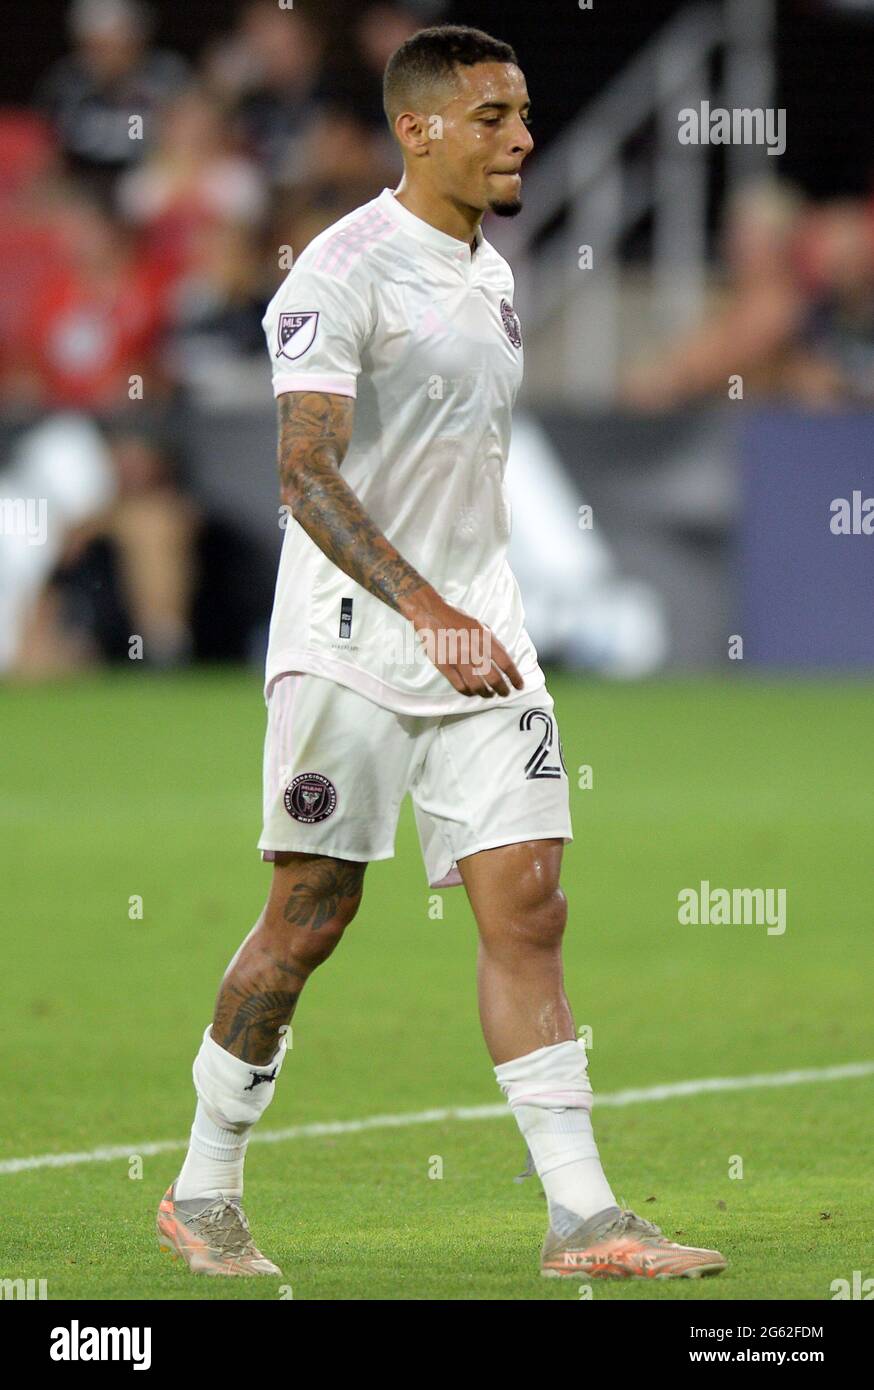 Washington, Dc, USA. 19th June, 2021. 20210619 - Inter Miami FC midfielder GREGORE SILVA (26) exits the pitch in the second half after receiving his second yellow card of the match against D.C. United at Audi Field in Washington. Credit: Chuck Myers/ZUMA Wire/Alamy Live News Stock Photo